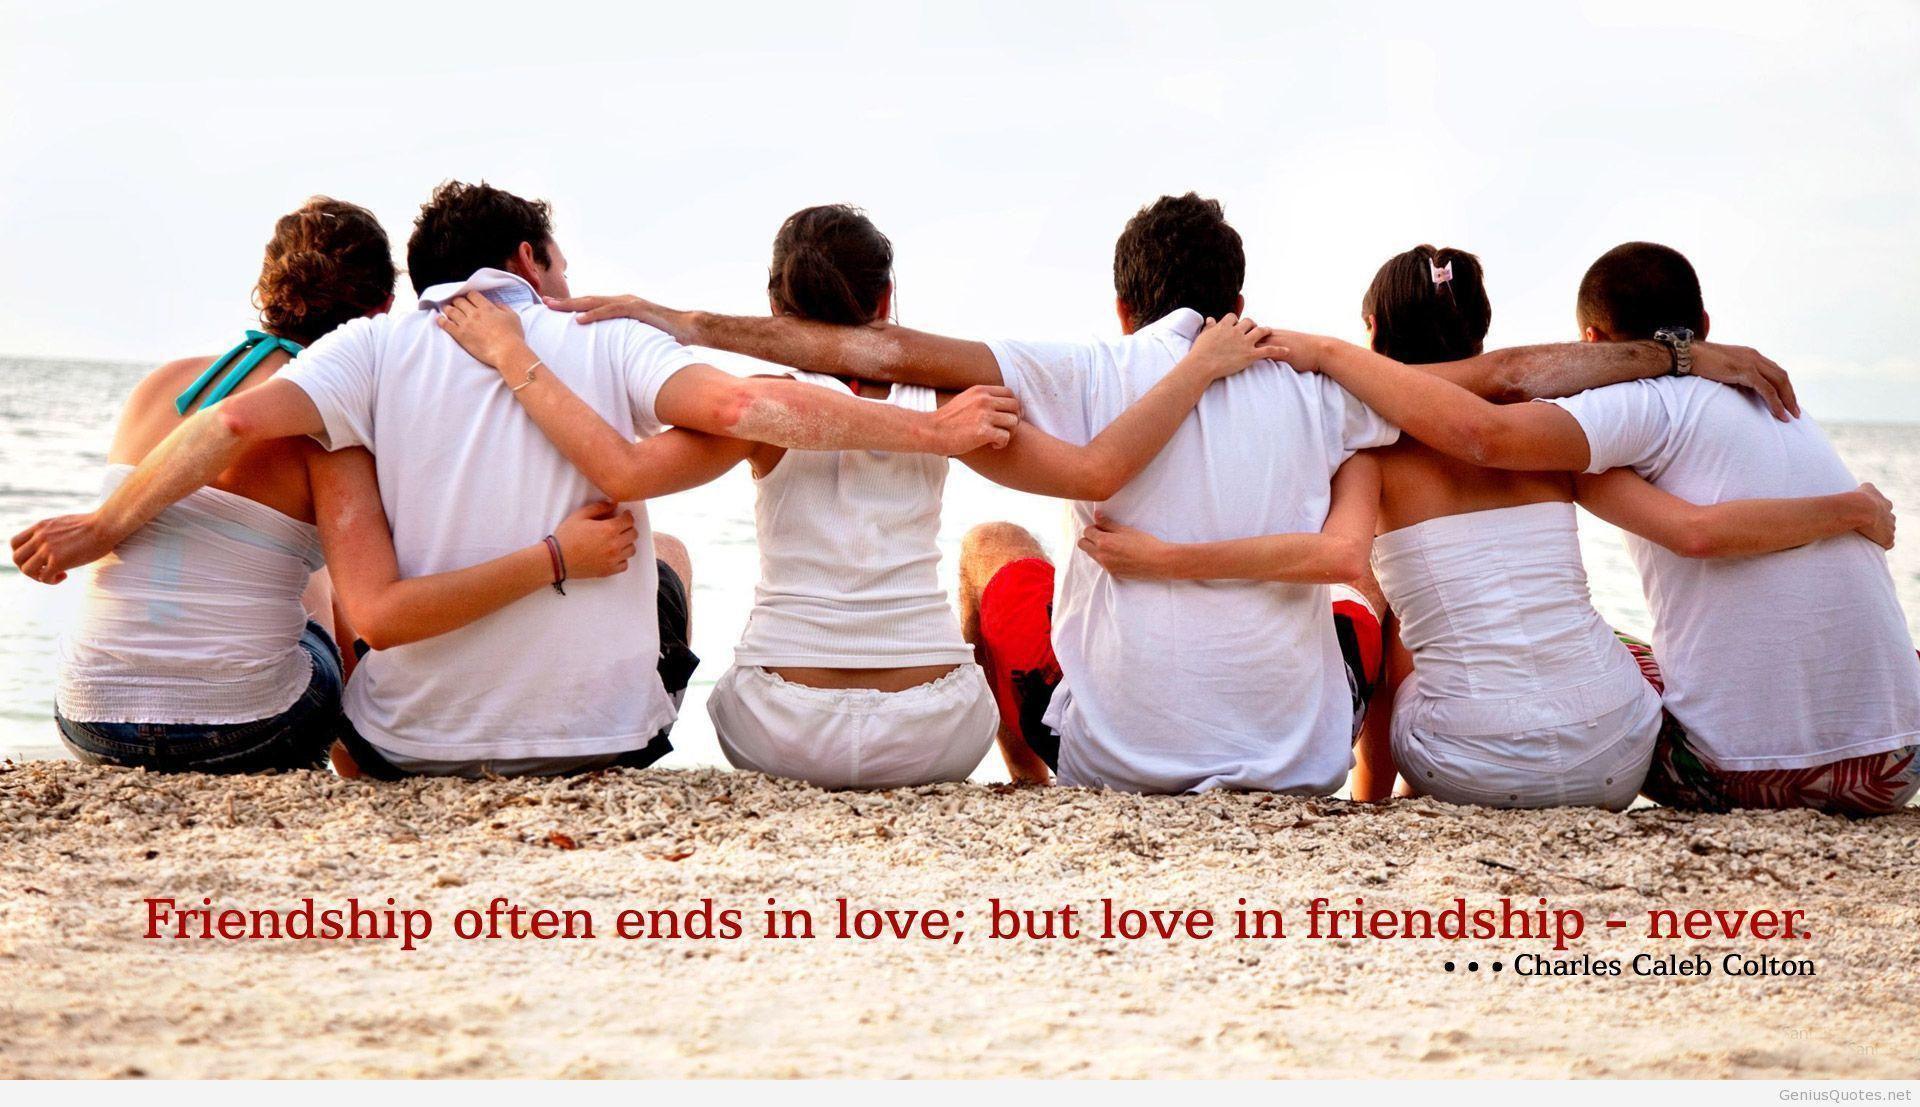 Best friends forever quotes image and friends wallpaper quote